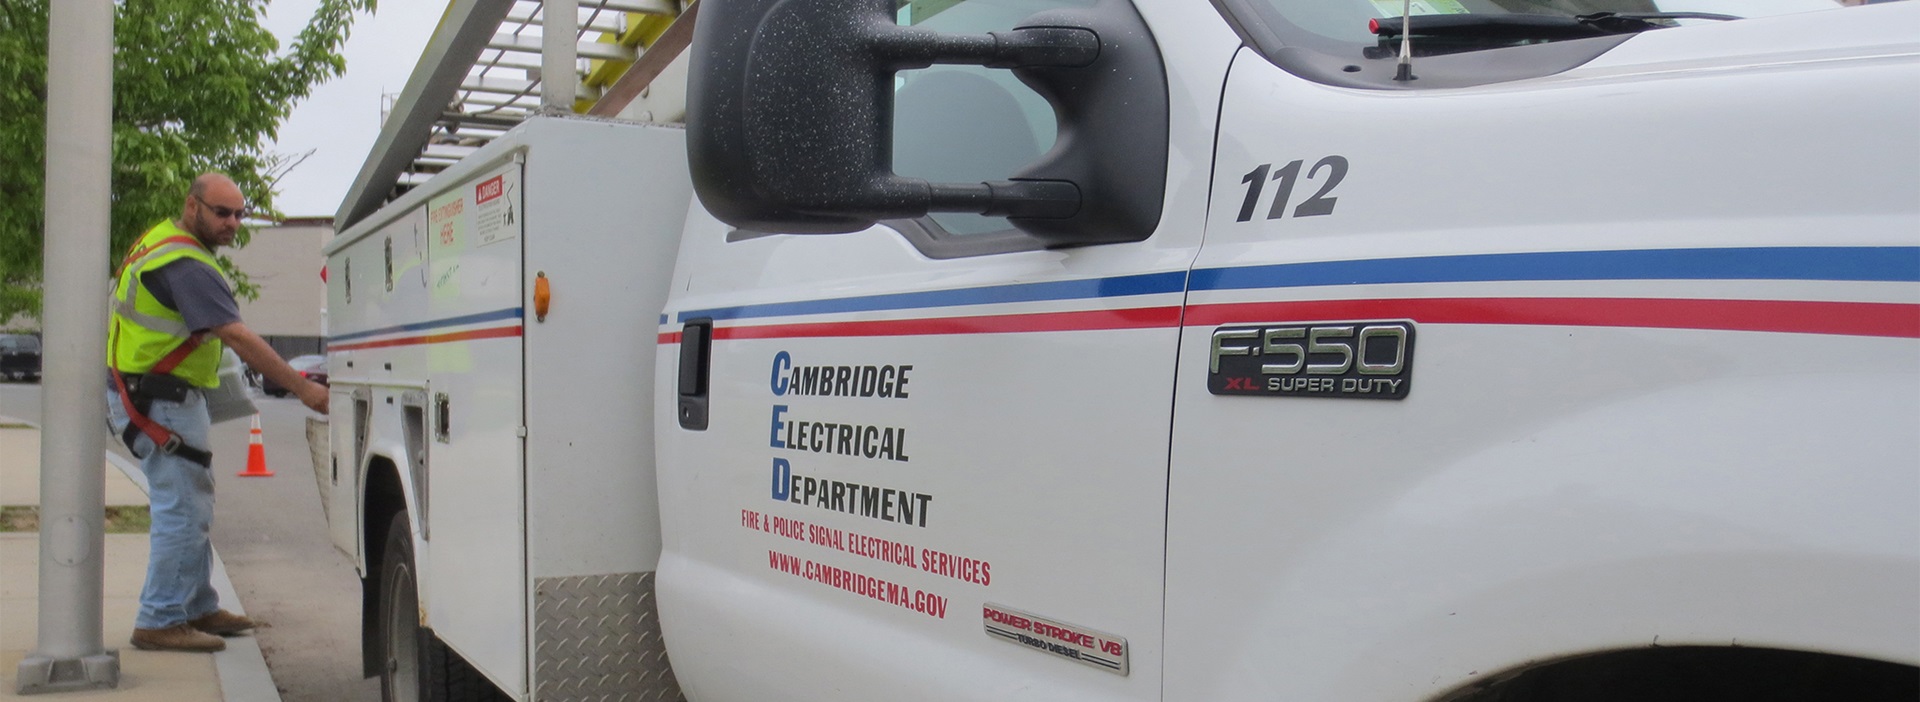 Photo of a Cambridge Electrical Department truck